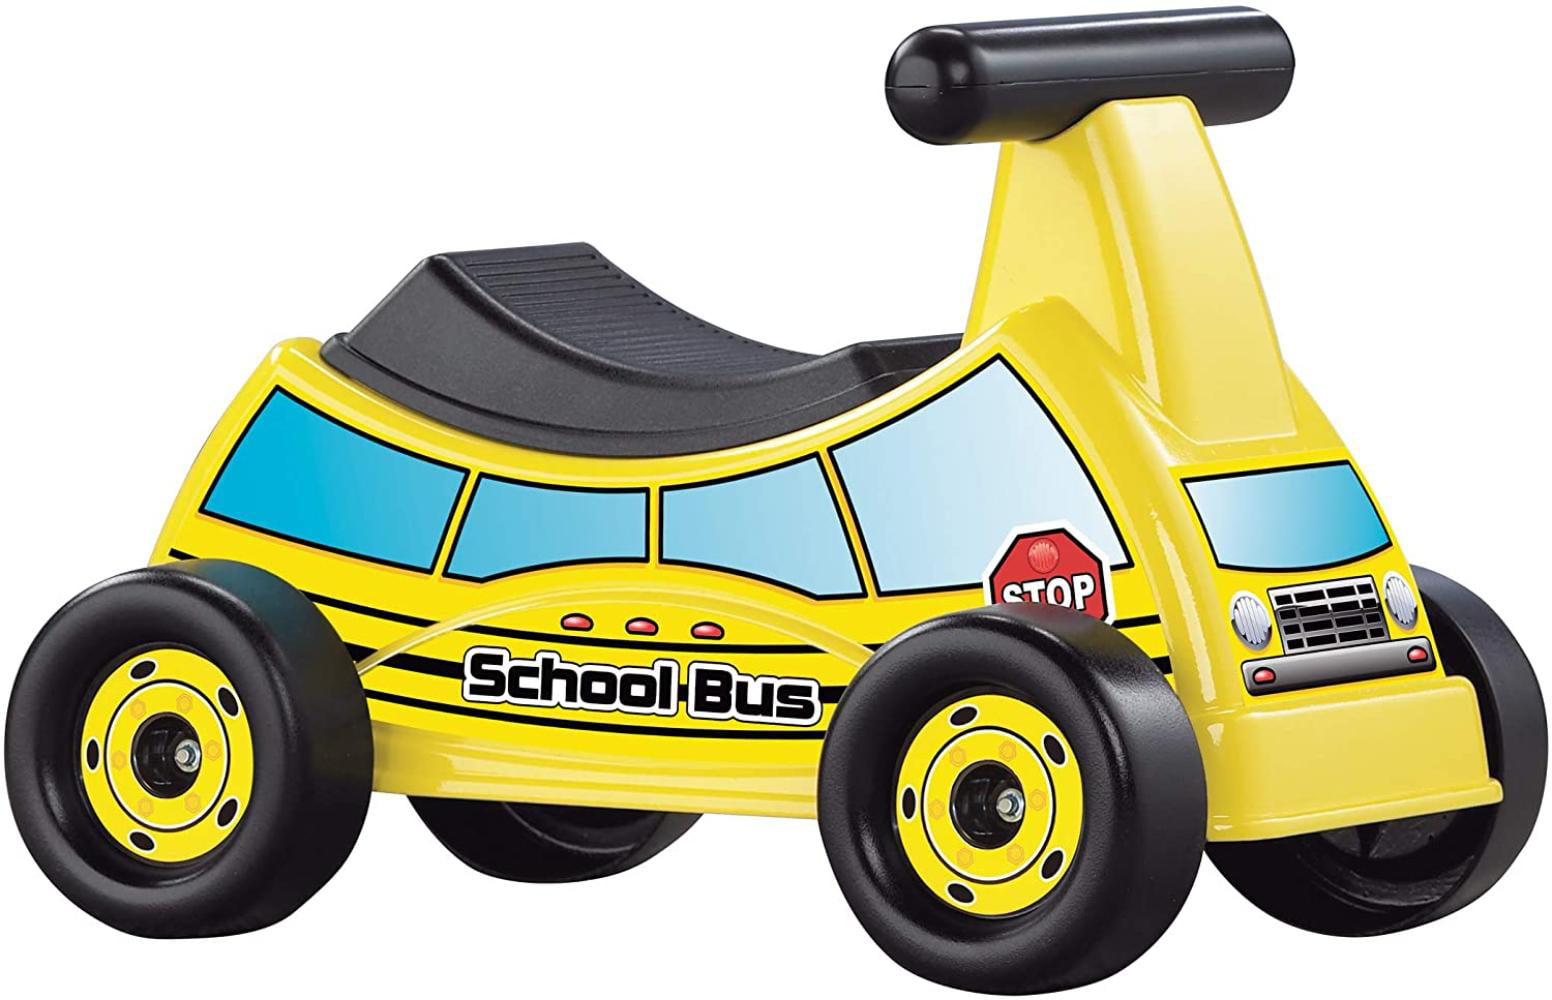 American Plastic Toys School Bus Ride-on Yellow Model30010 for sale online